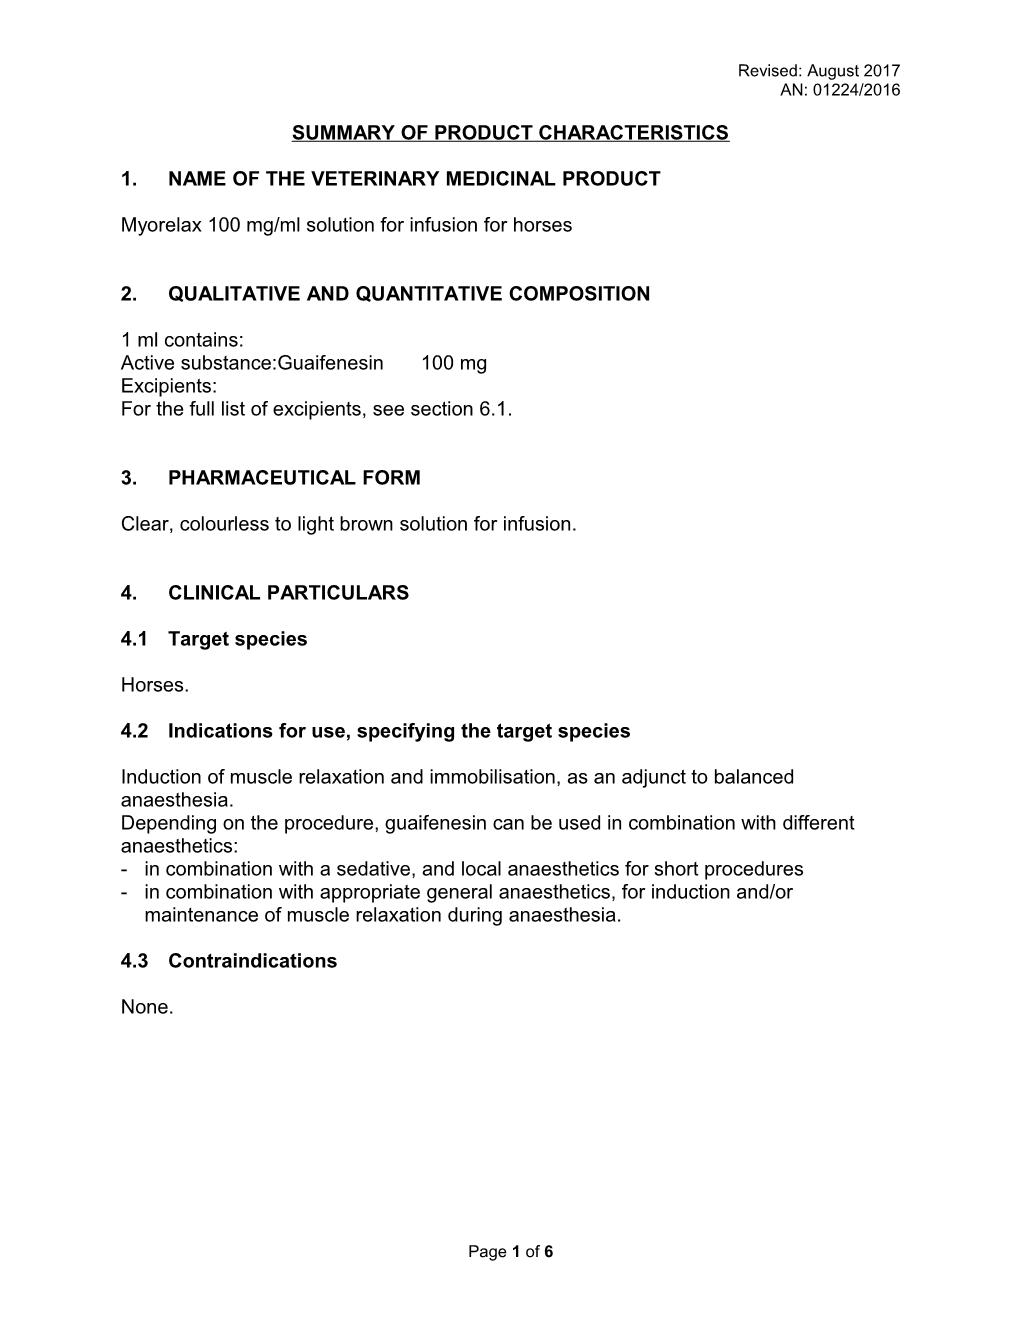 1. Name of the Veterinary Medicinal Product s18